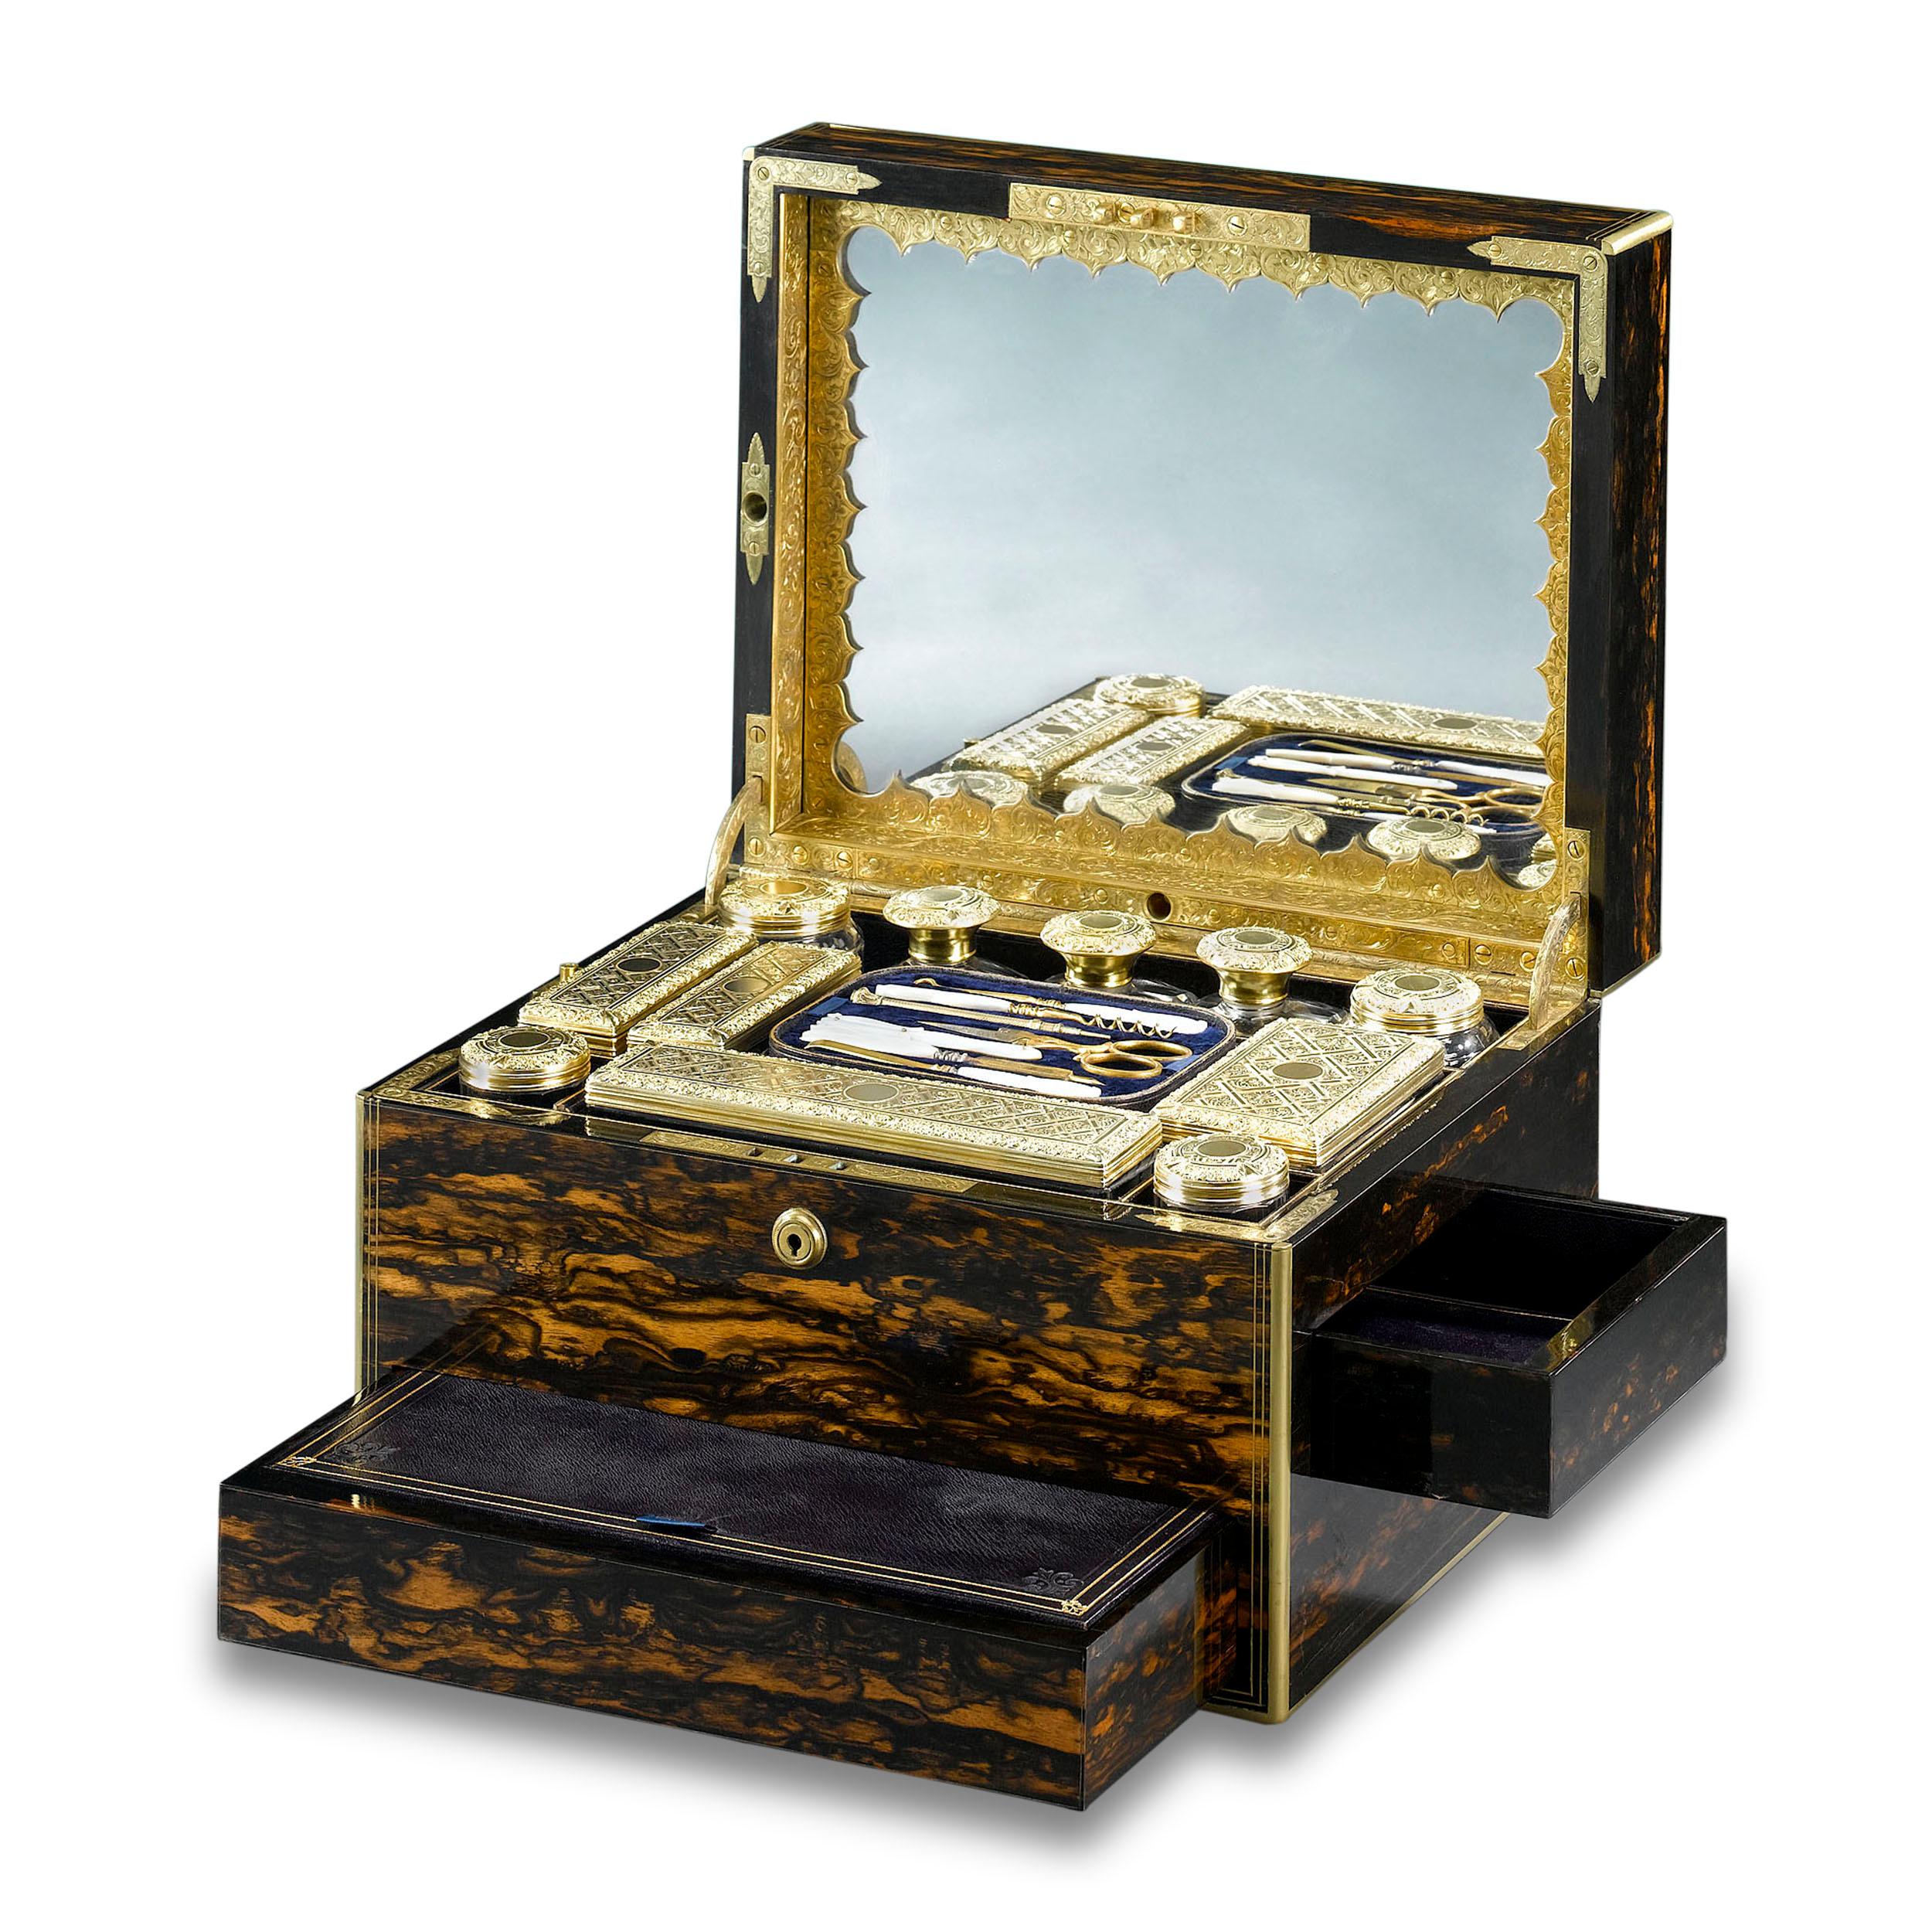 This elegant English nécessaire de voyage is veneered with rich coromandel wood with brass inlay. It is protected by rare Bramah locks, making it impeccably suited for carrying everything a person of nobility would need while traveling. The inside